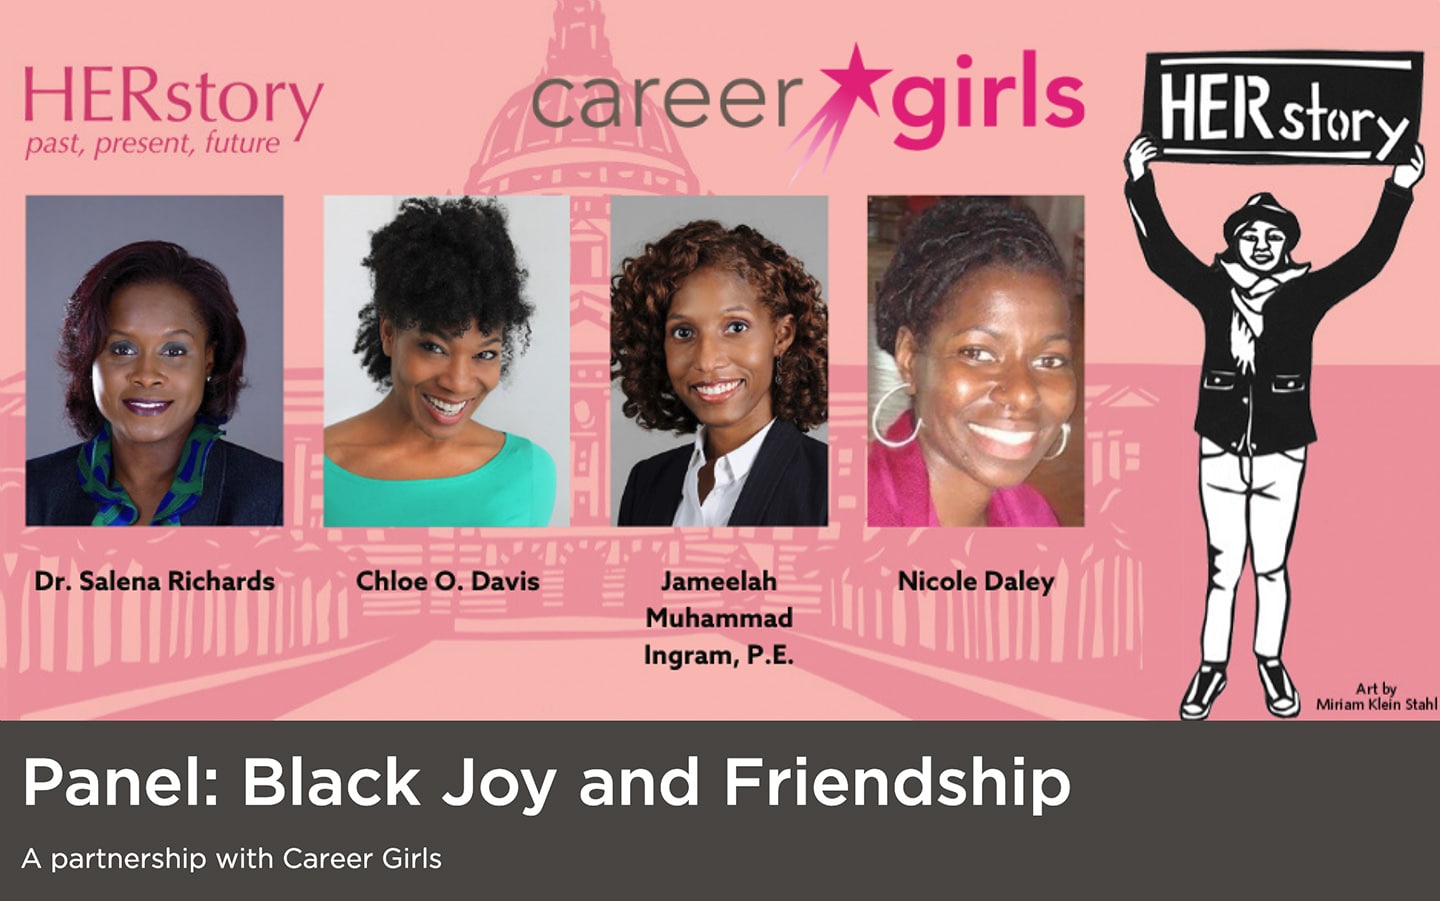 Black Joy and Friendship San Francisco Public Library Event with headshots of role models featured on the panel